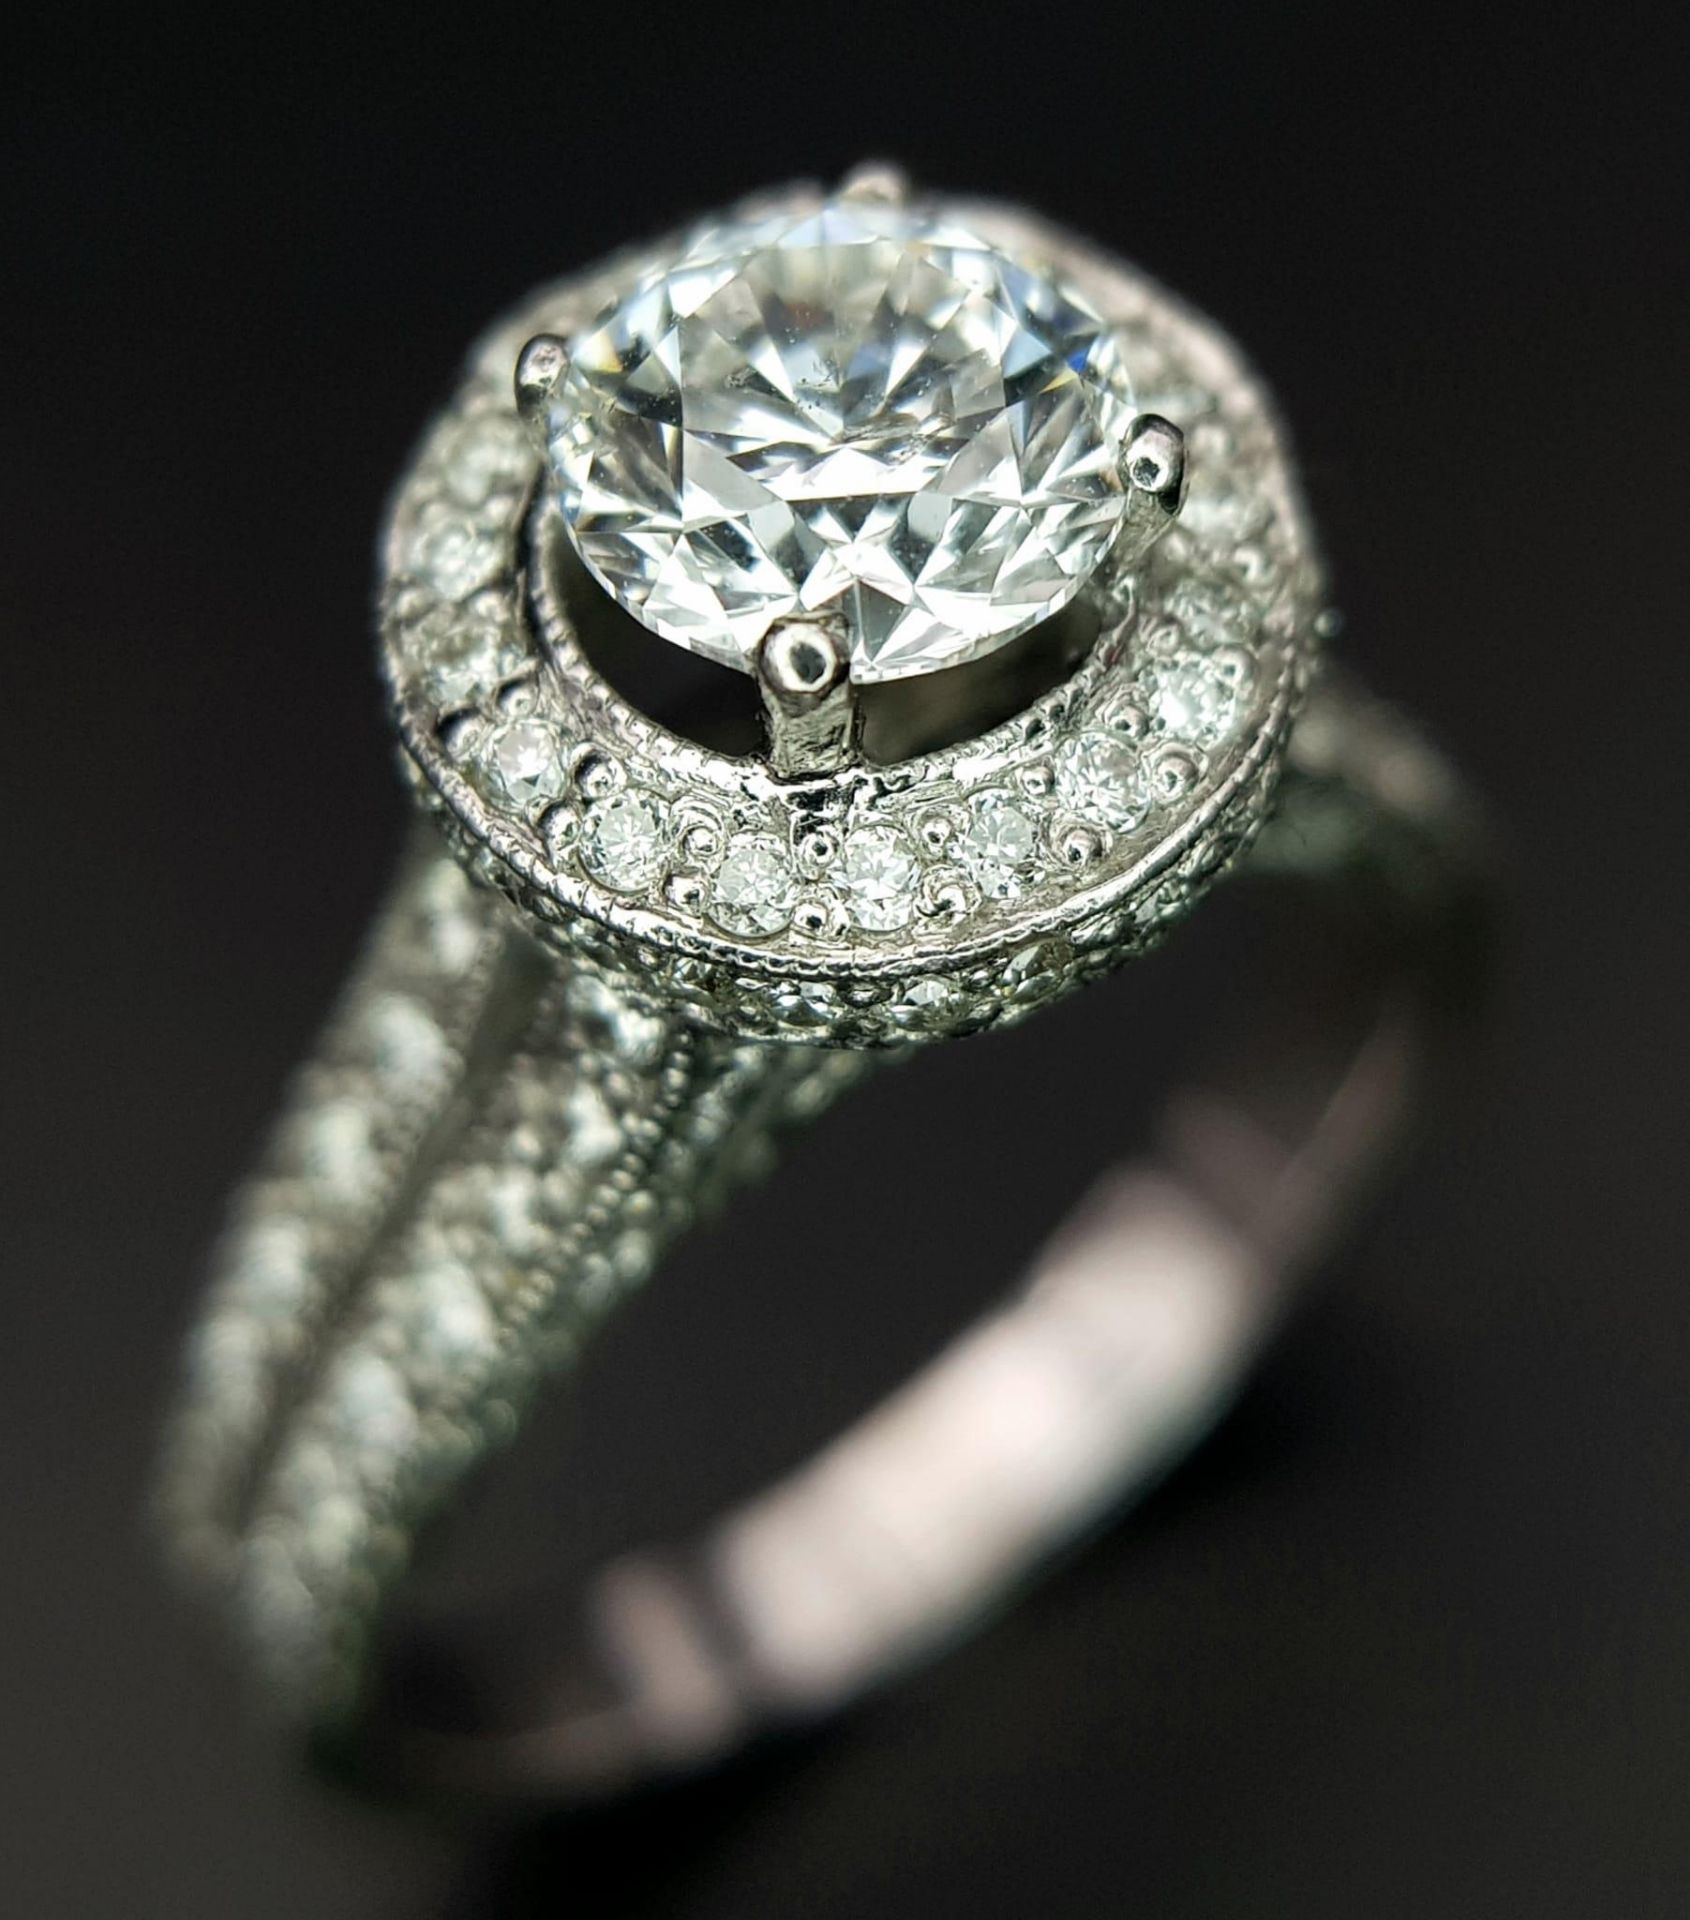 An 18 K white gold ring with a brilliant cut diamond (1.01 carats) surrounded by diamonds on the top - Bild 2 aus 22